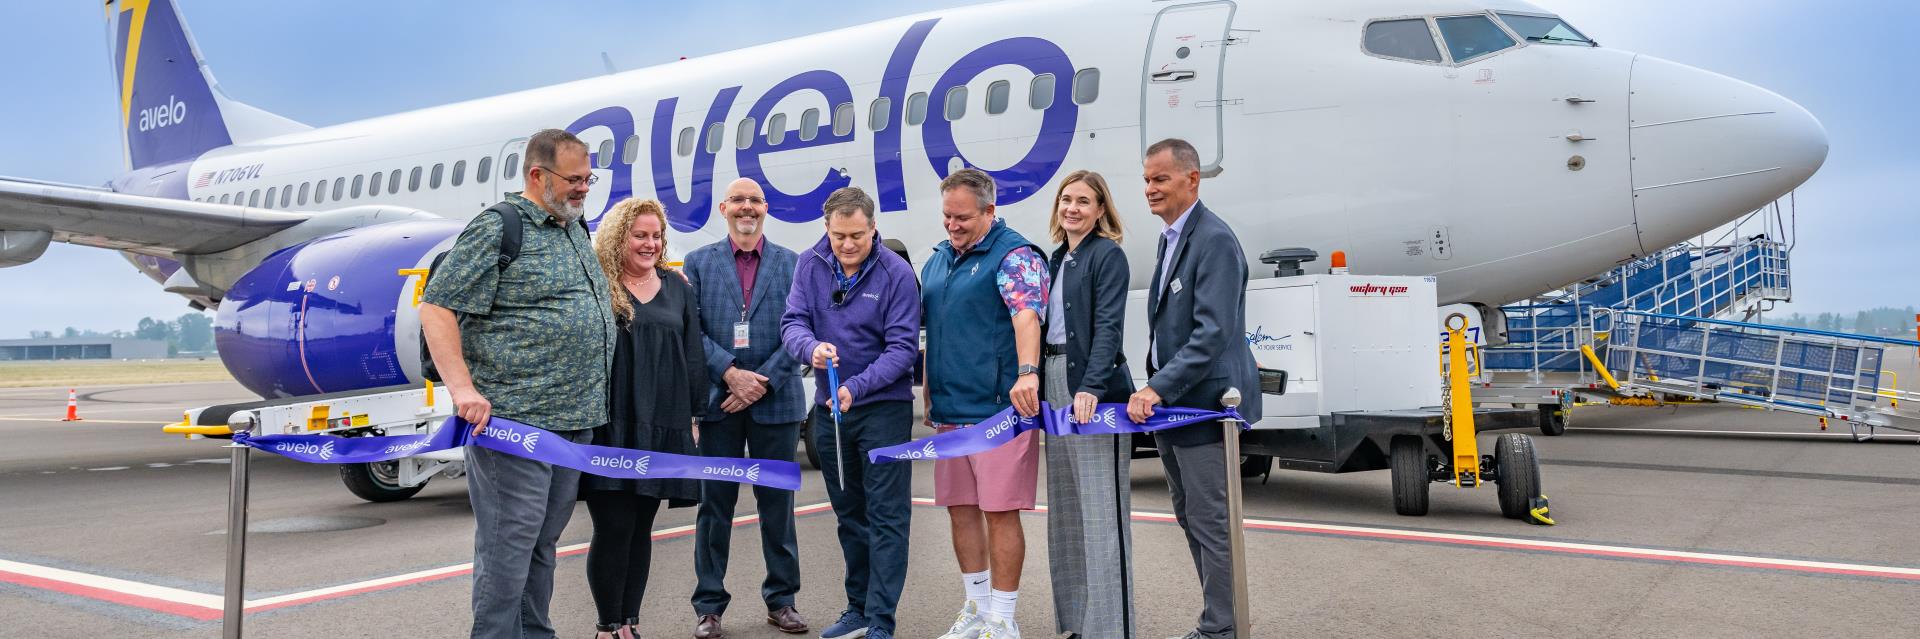 Ribbon Cutting announcing Avelo Airlines in 2023